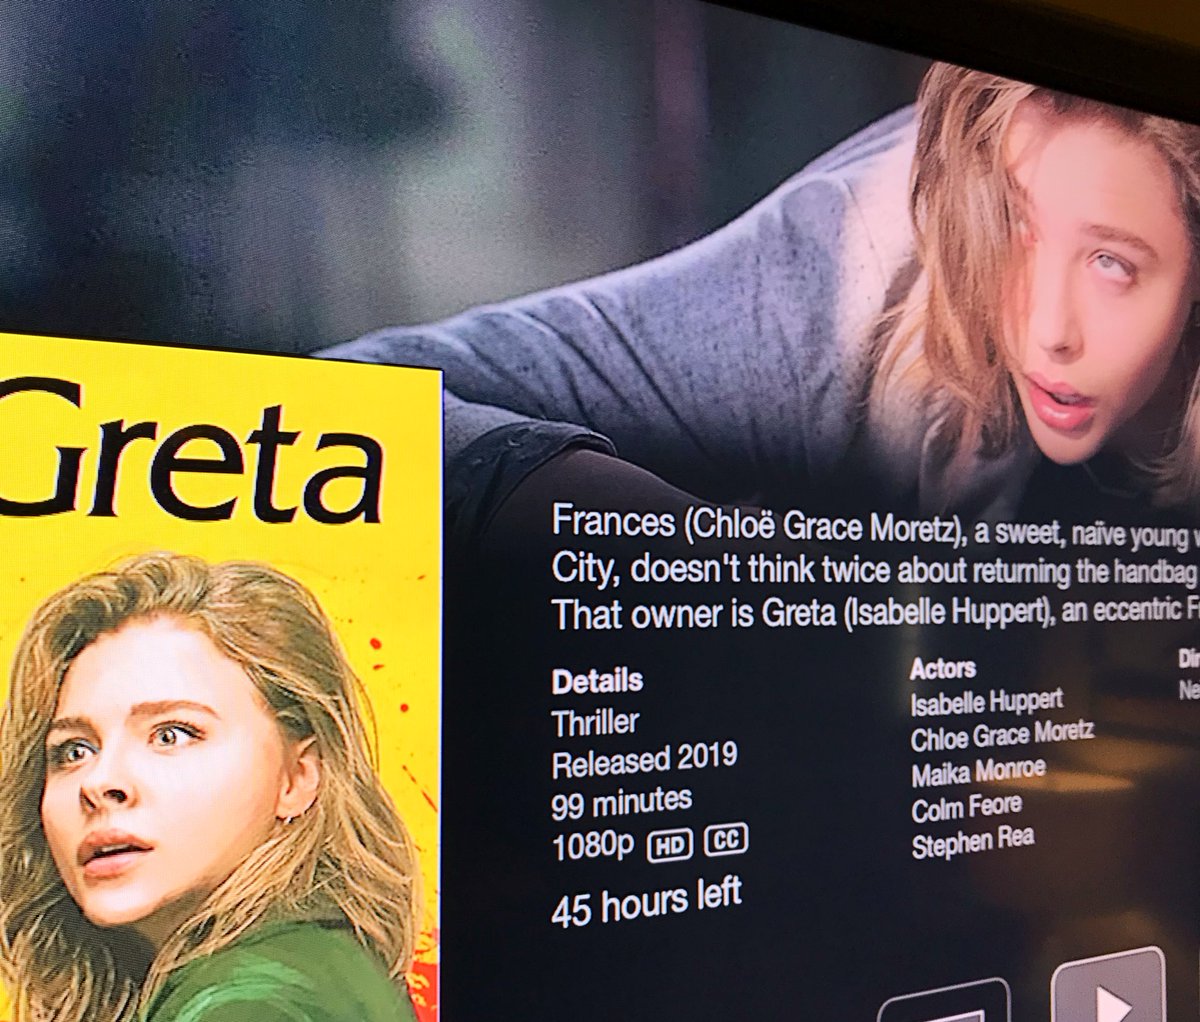 The movie playing the in background is GRETA, which is v. cool. Question for  @ChloeGMoretz, what would happen if a new girl shows up with a bag while the current girl is out of the box?